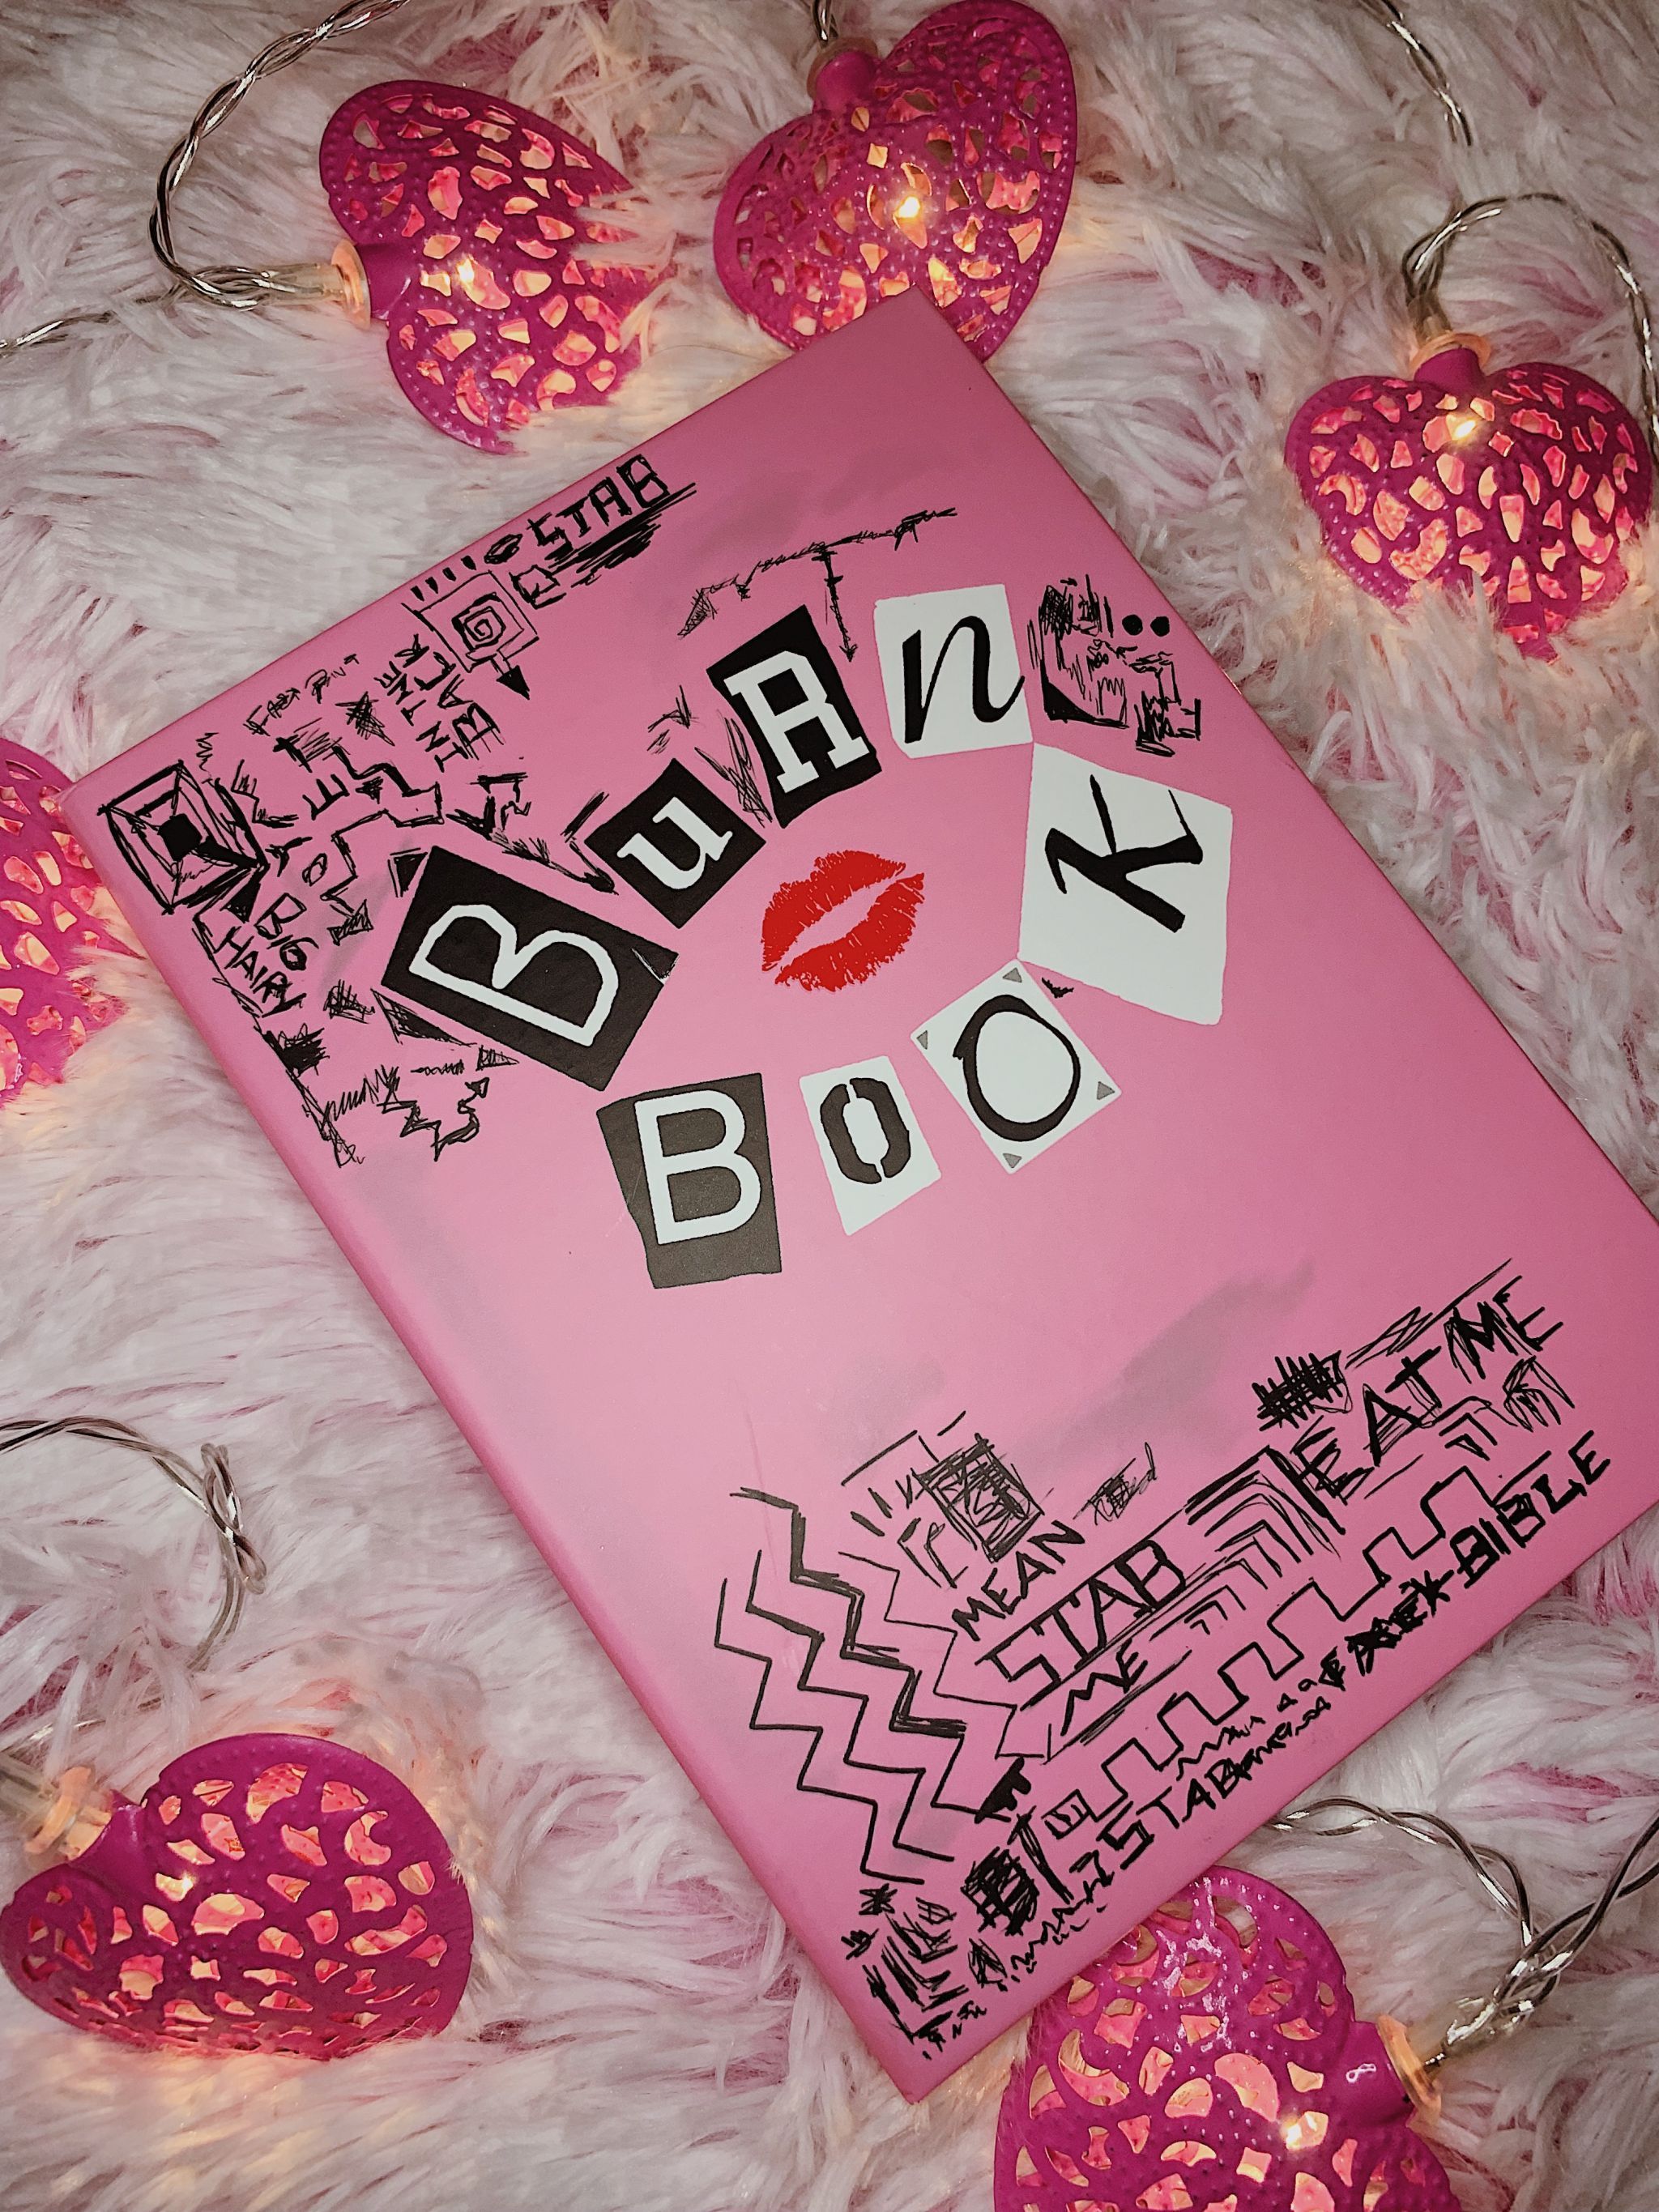 Mean Girls x Storybook Cosmetics Burn Book Palette Swatches & Review Lune. Storybook cosmetics, Pastel pink aesthetic, Mean girls